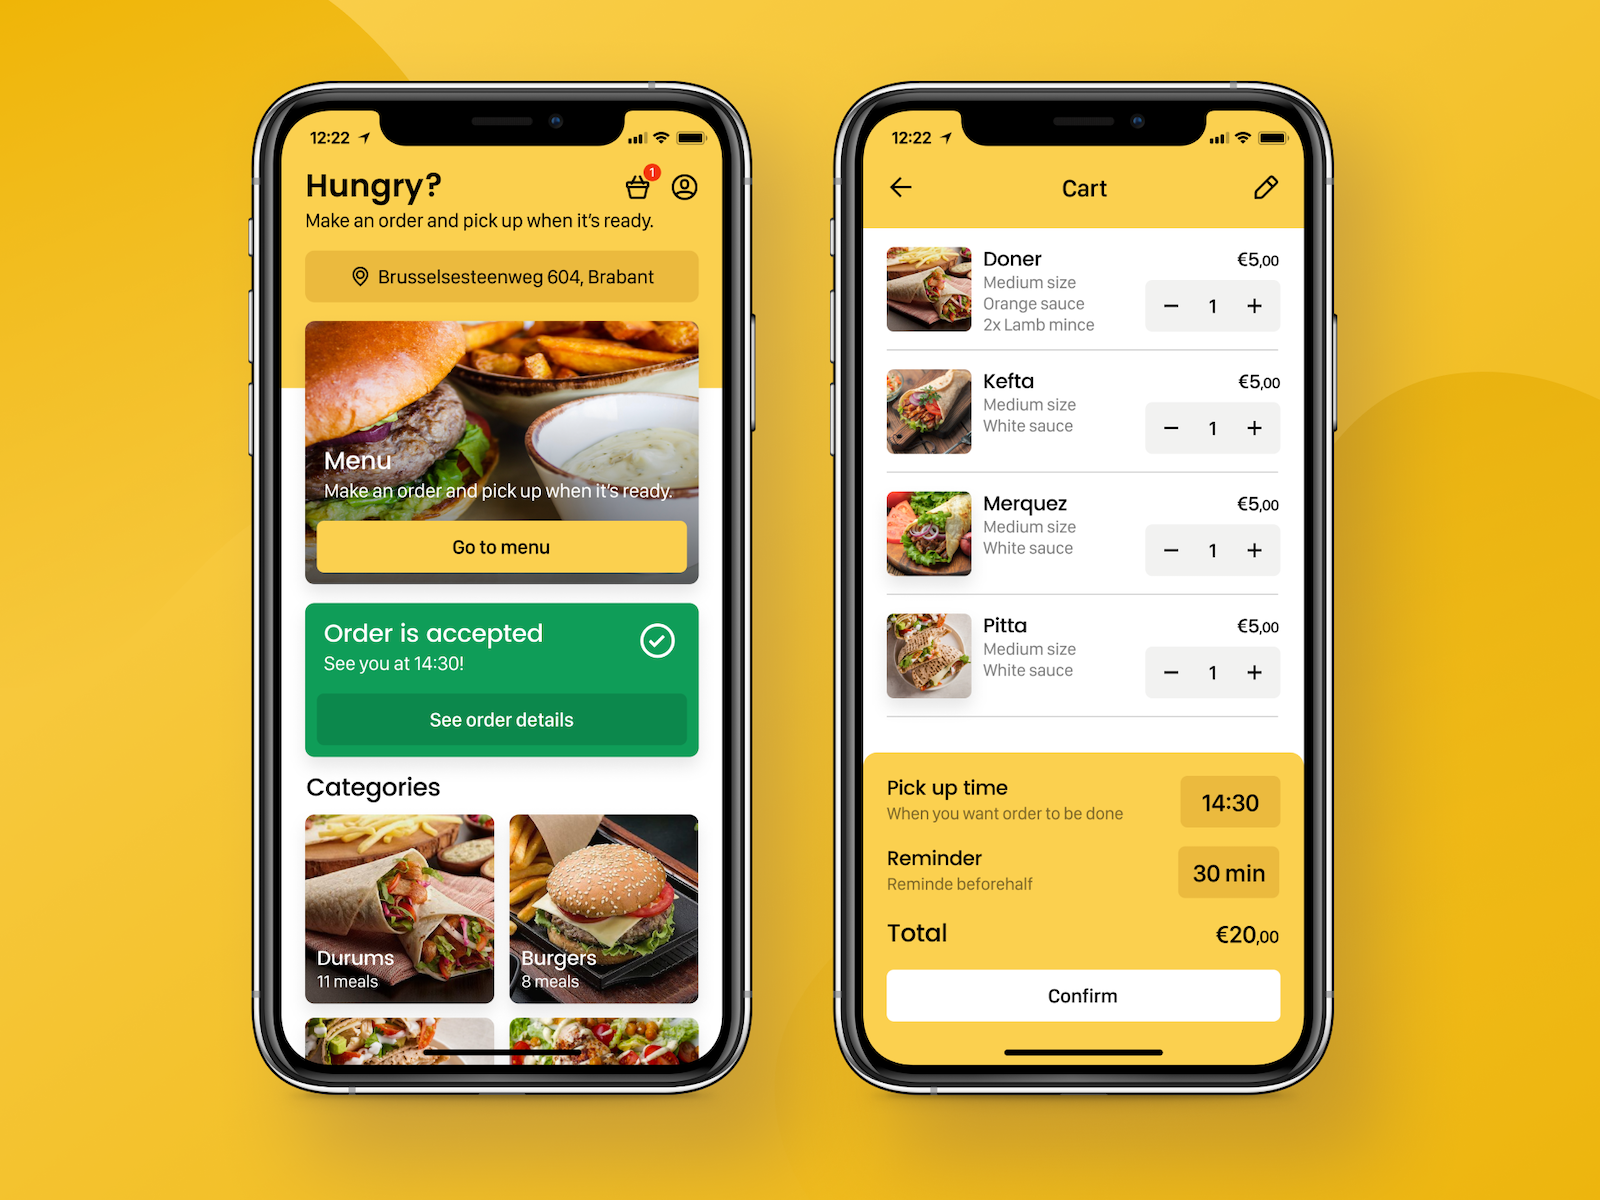 Food Ordering App - Main and Cart Screens by Dima Miro on Dribbble